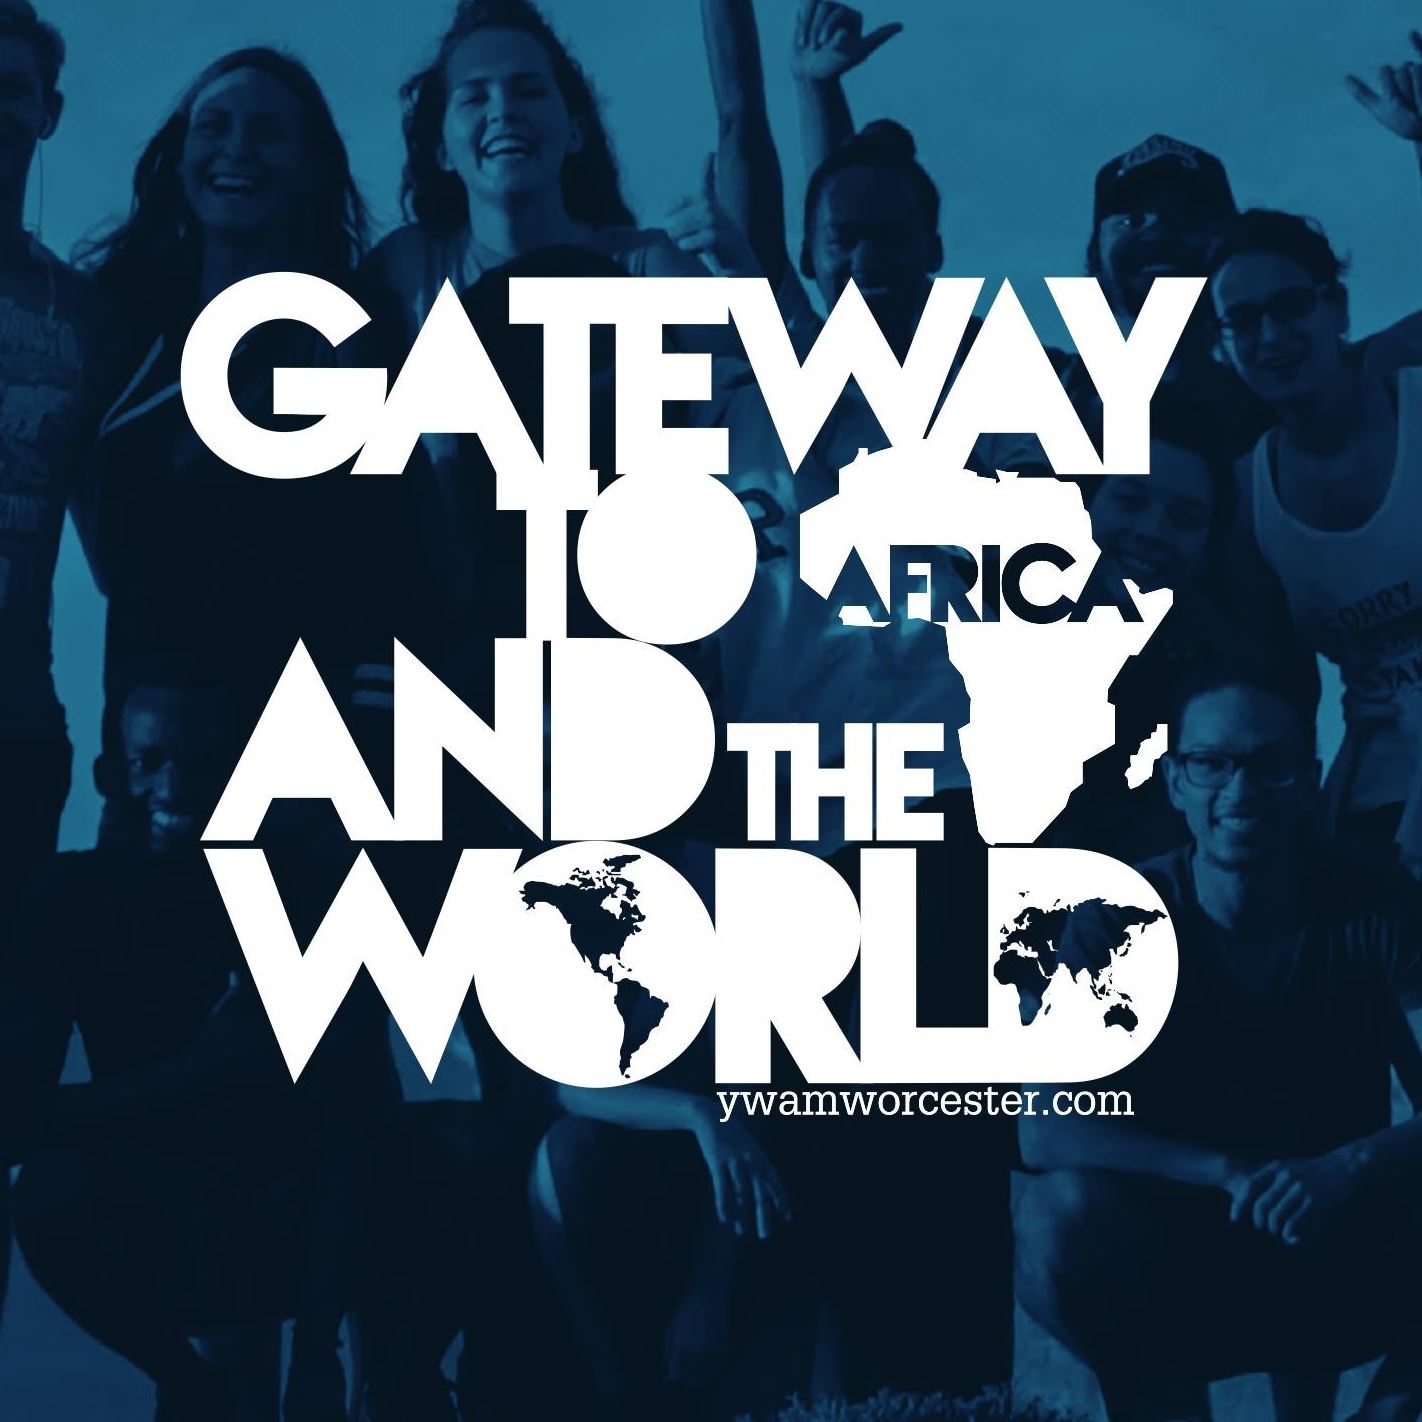 YWAM Worcester - Gateway to Africa and the World